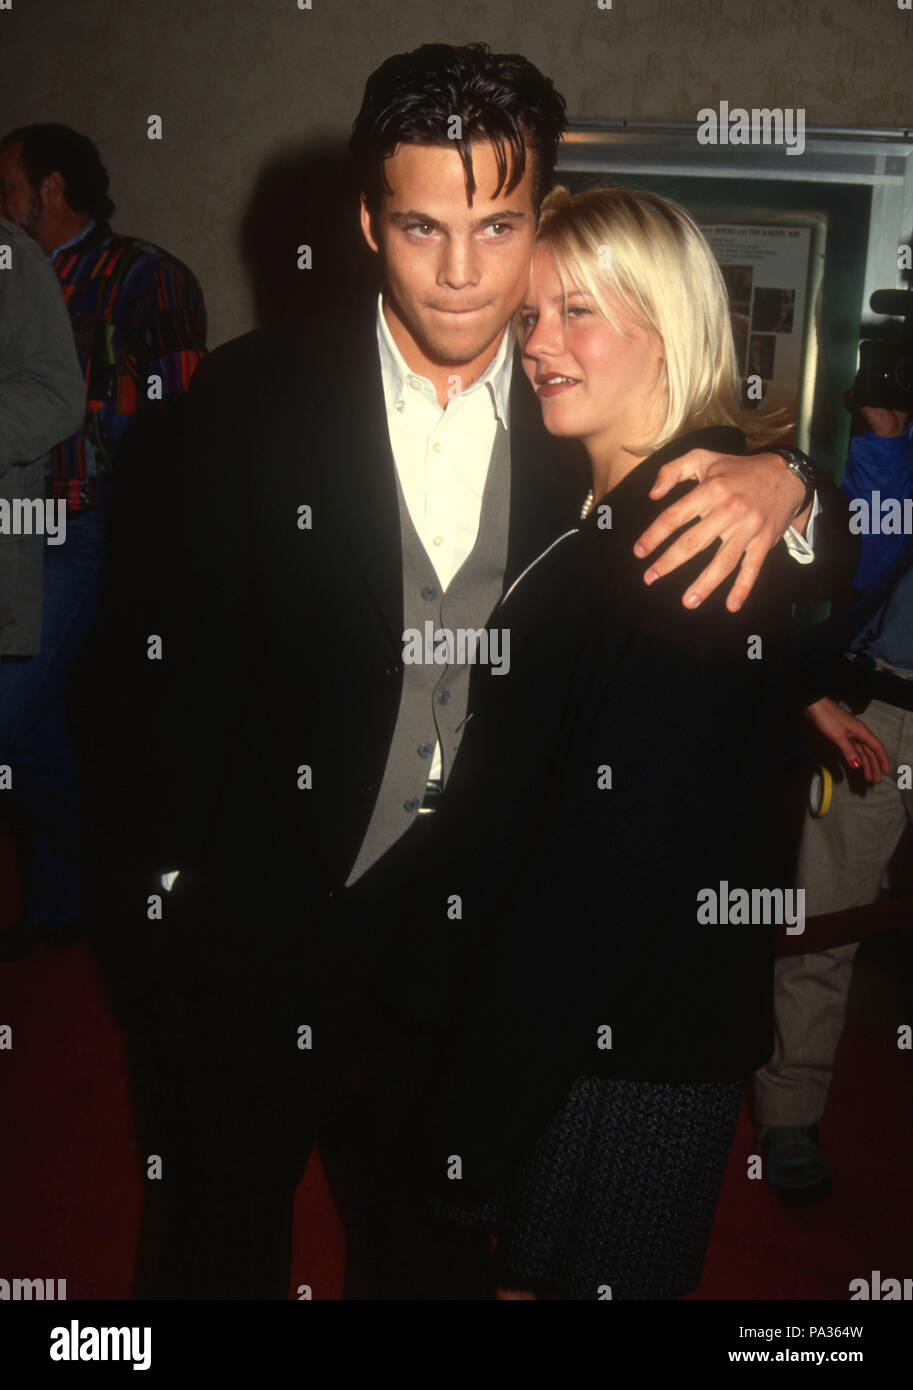 WESTWOOD, CA - MARCH 24: (L-R) Actor Stephen Dorff and actress Courtney Wagner attend 'The Power of One' Premiere on March 24, 1992 at Mann's Bruin Theatre in Westwood, California. Photo by Barry King/Alamy Stock Photo Stock Photo